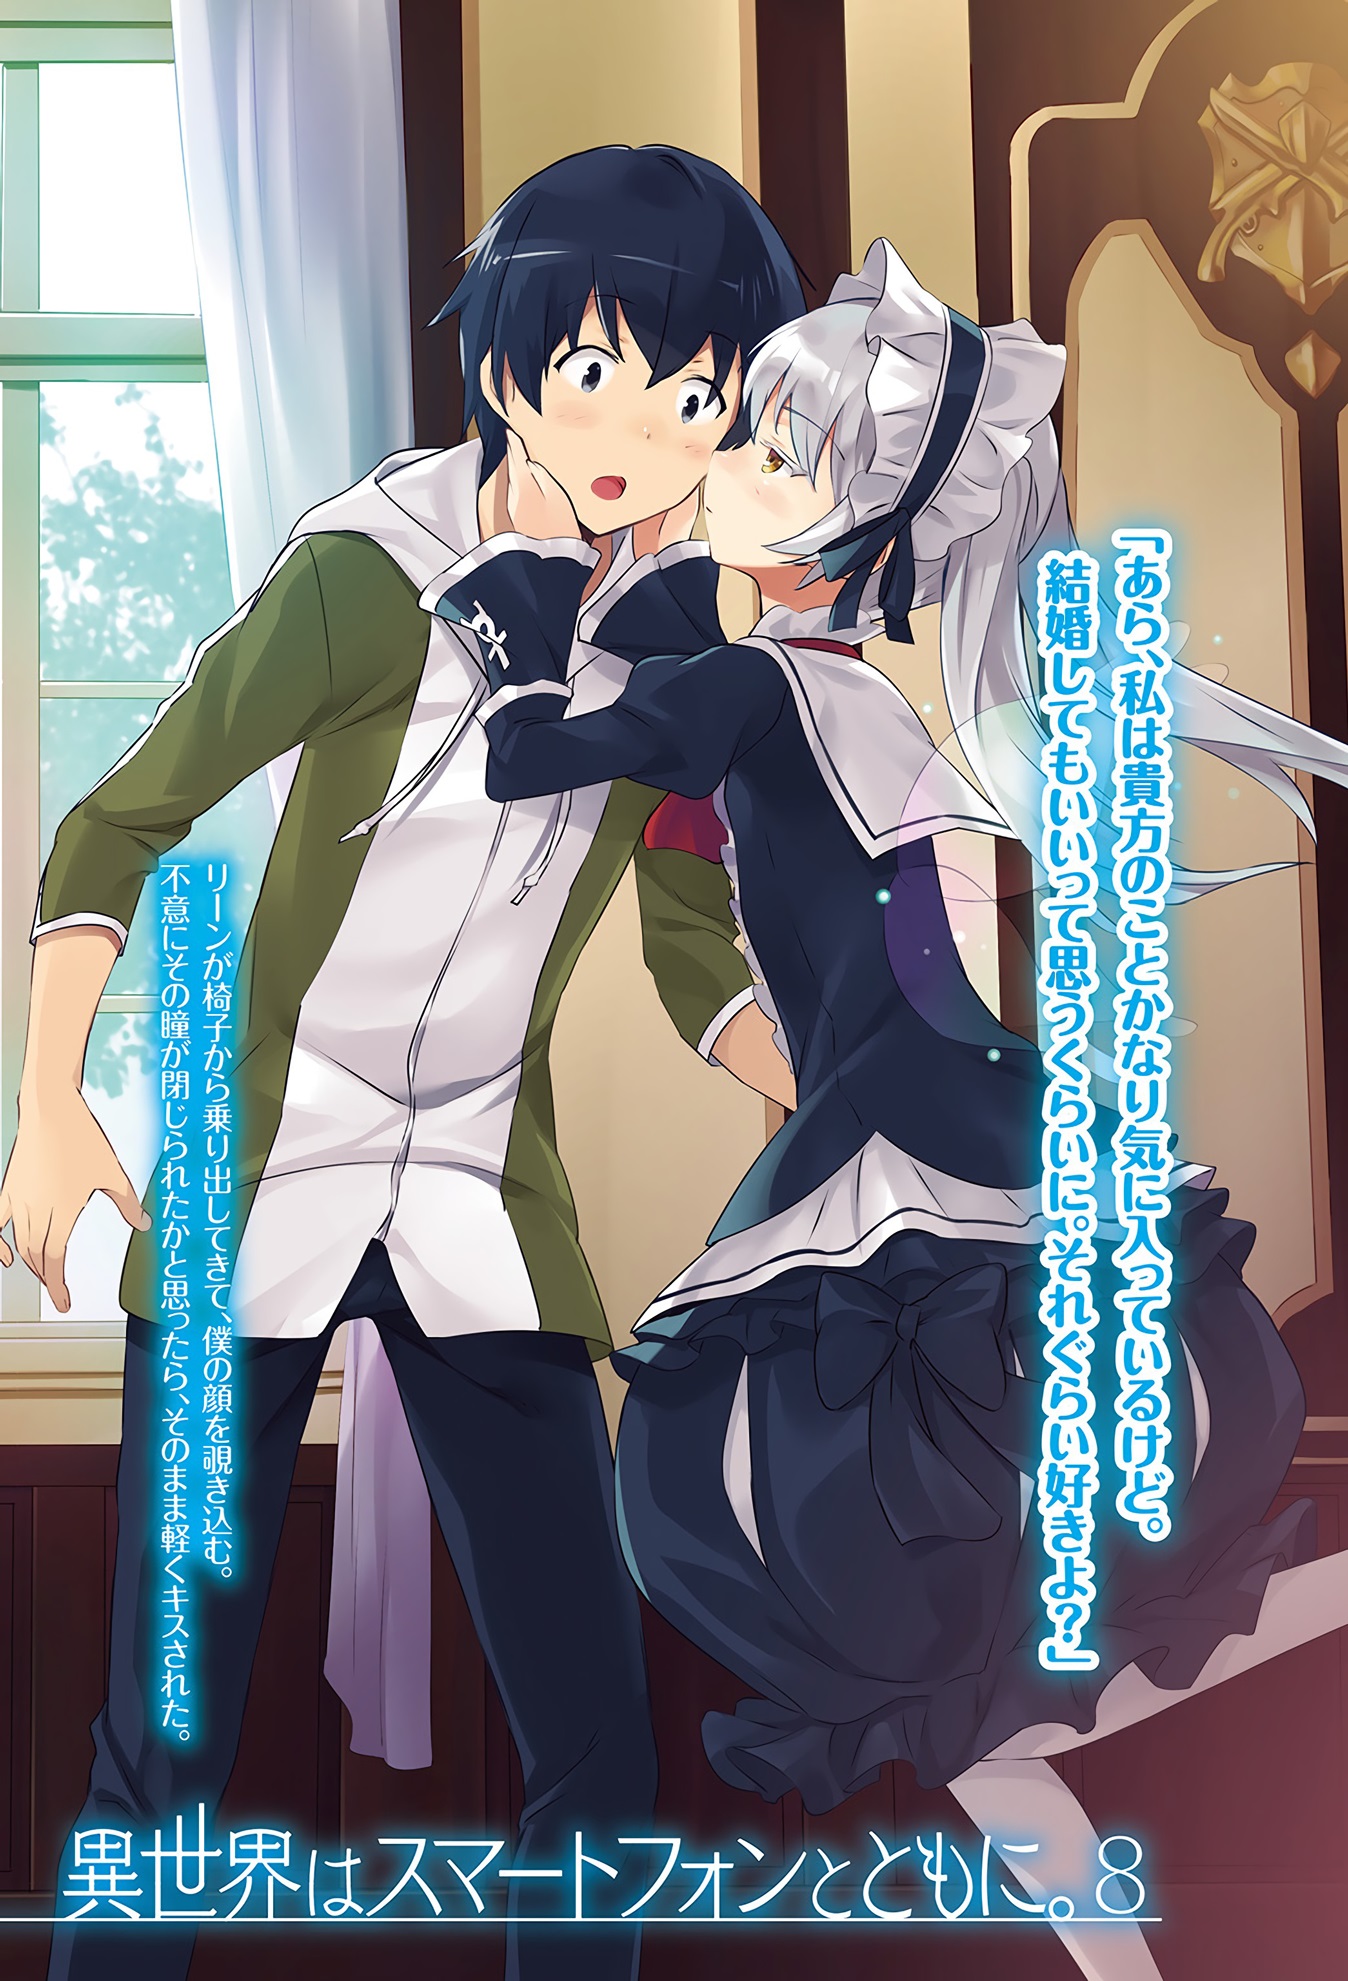 When touya fought ende do you think the animation and fight will be like  kirito vs eugeo? : r/IsekaiSmartphone